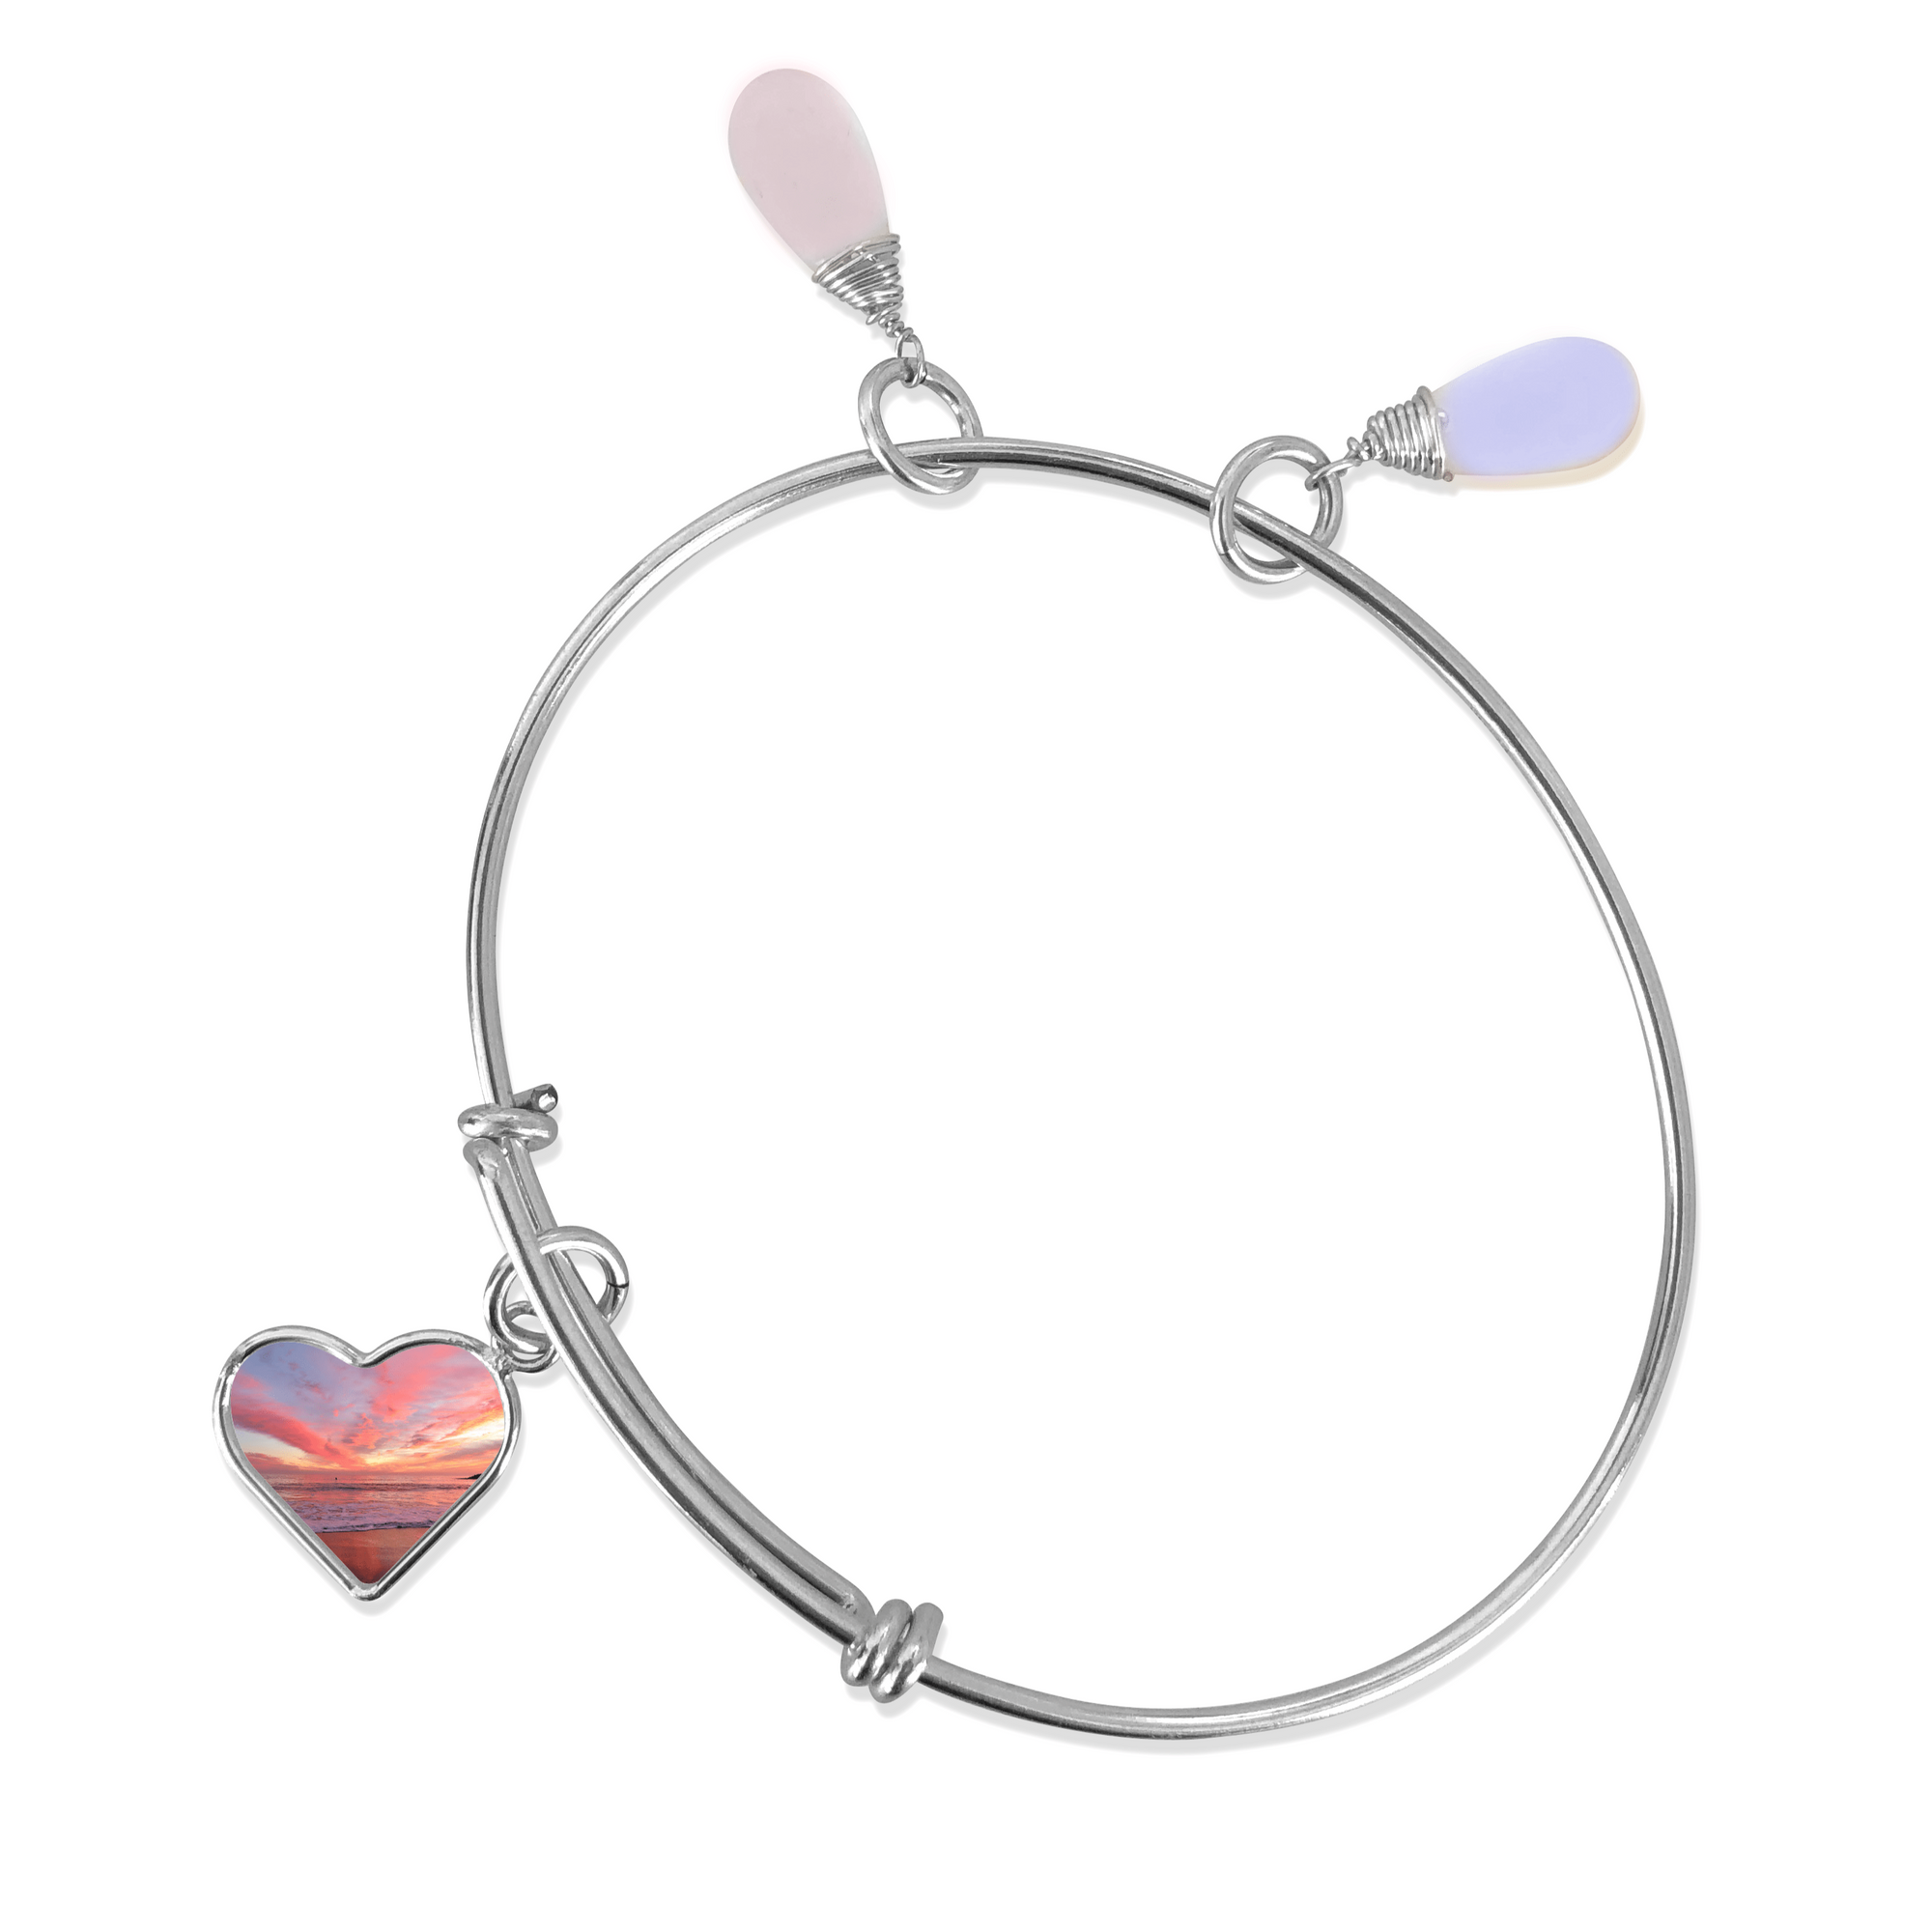 California Ocean Sunset Bangle by Heather Fassio